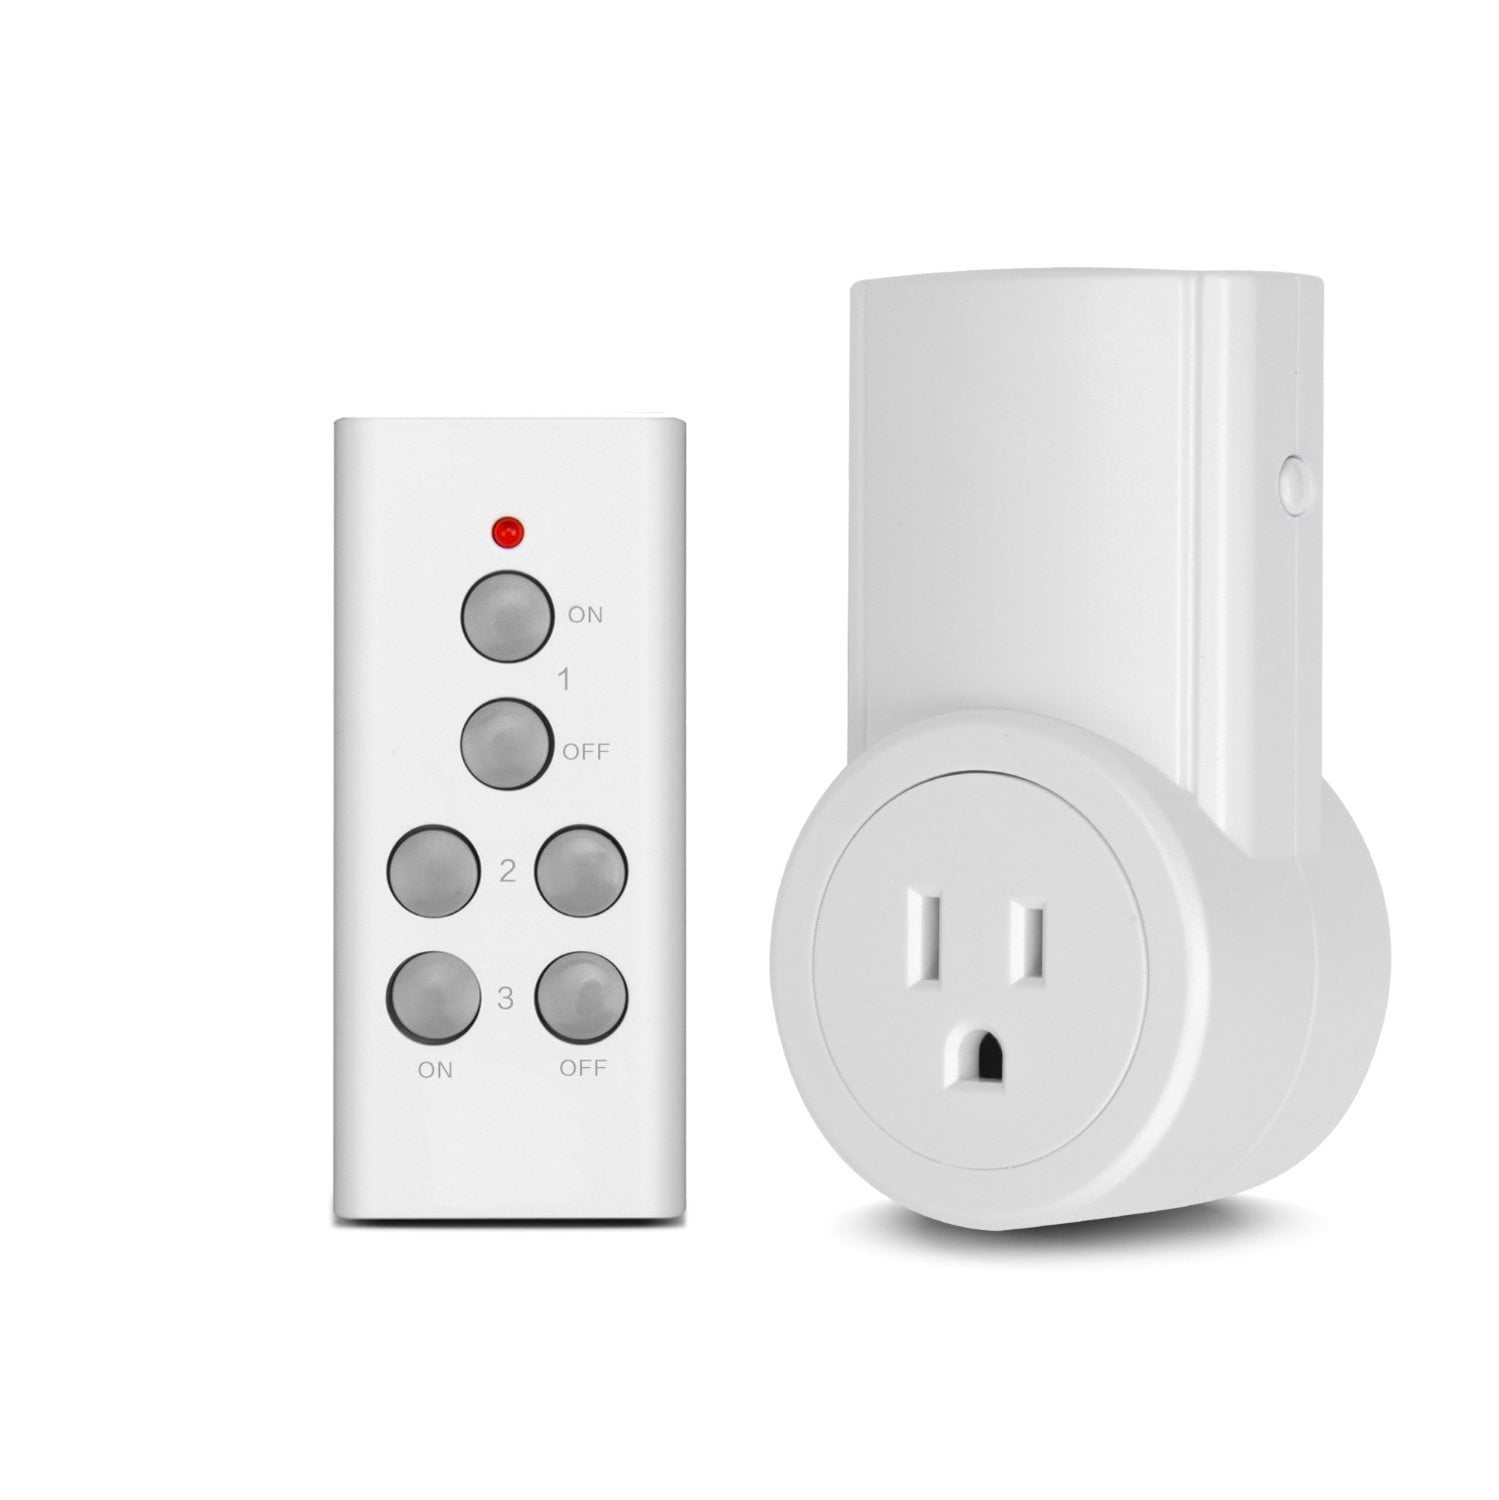 BN-LINK Wireless Remote Control Electrical Outlet Switch for Lights, Fans,  Christmas Lights, Small Appliance, Long Range White 10A/1200W, 1 Remote + 1  Outlet 